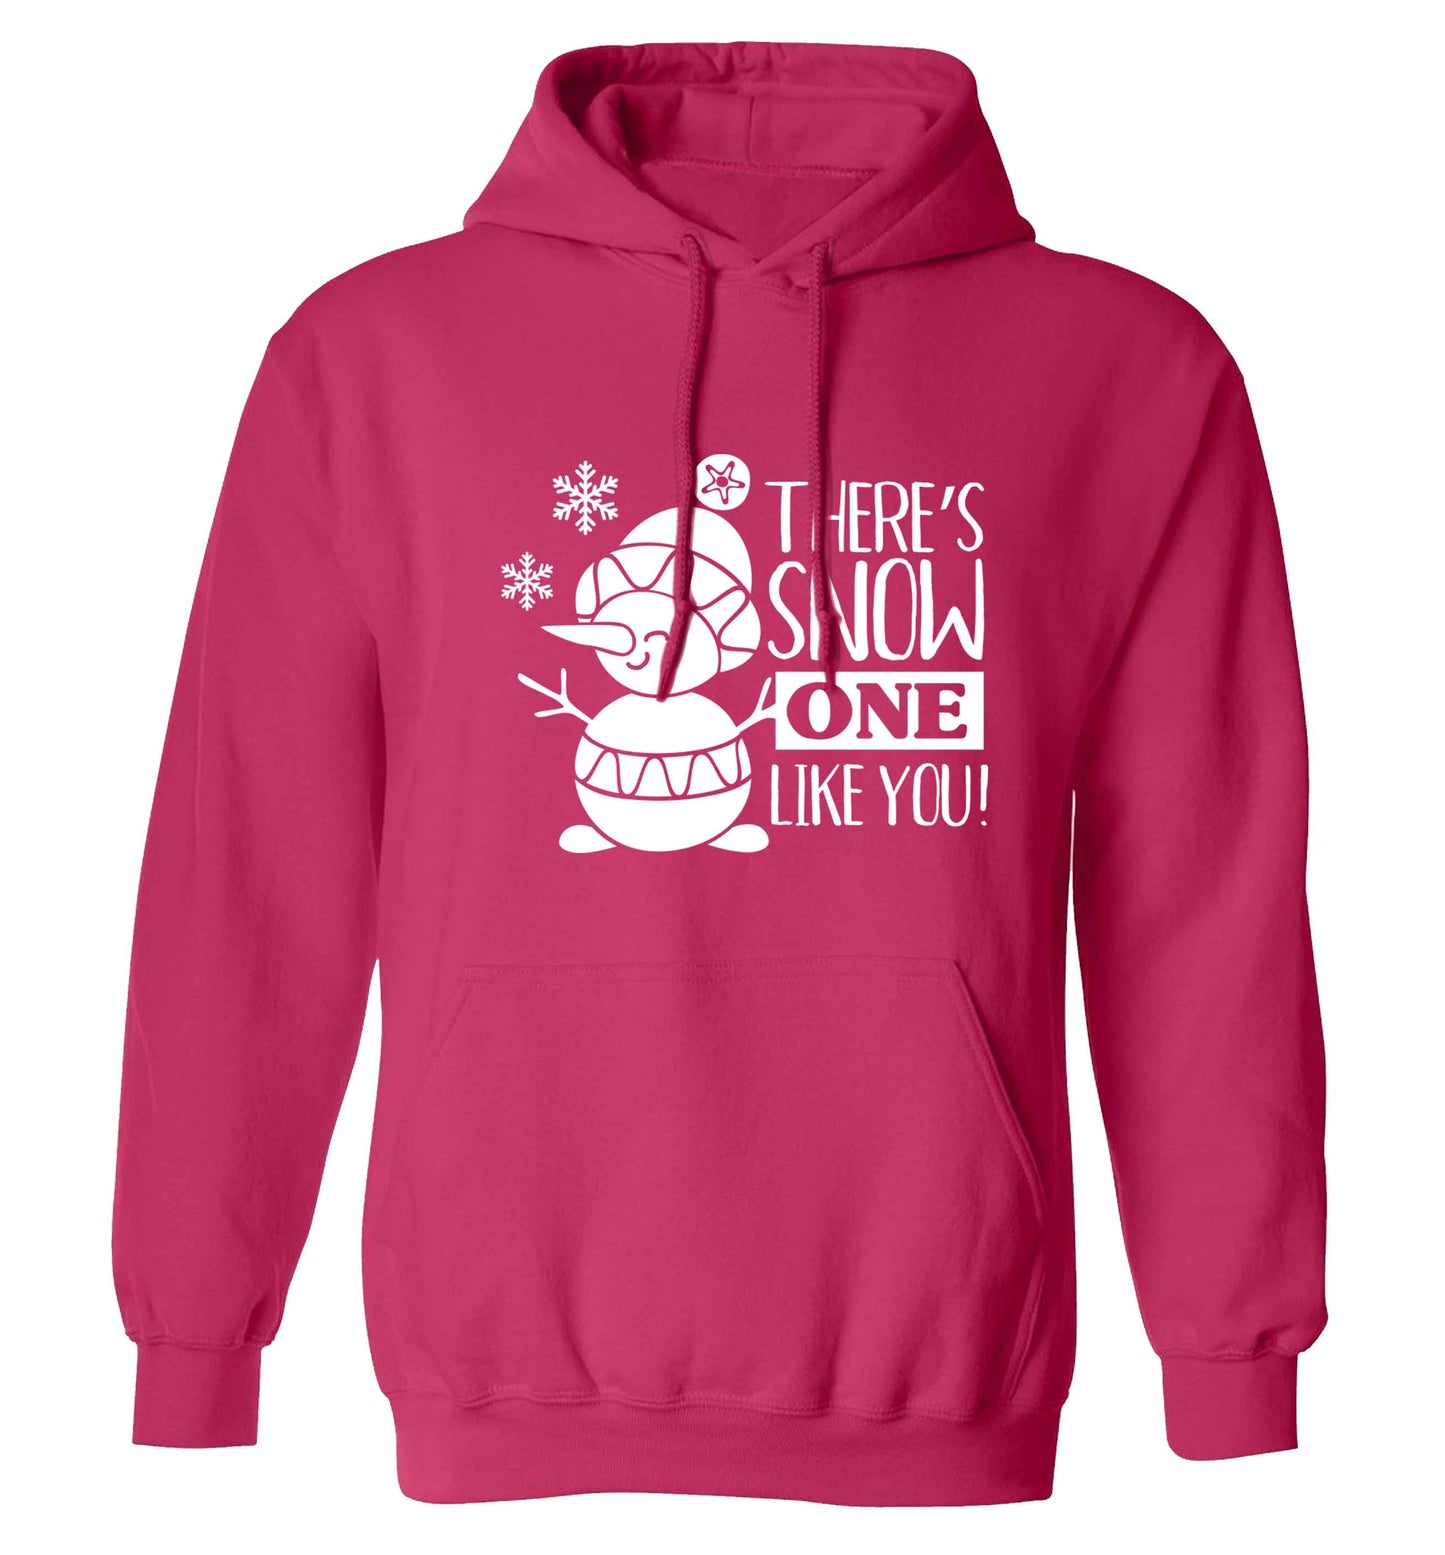 There's snow one like you adults unisex pink hoodie 2XL